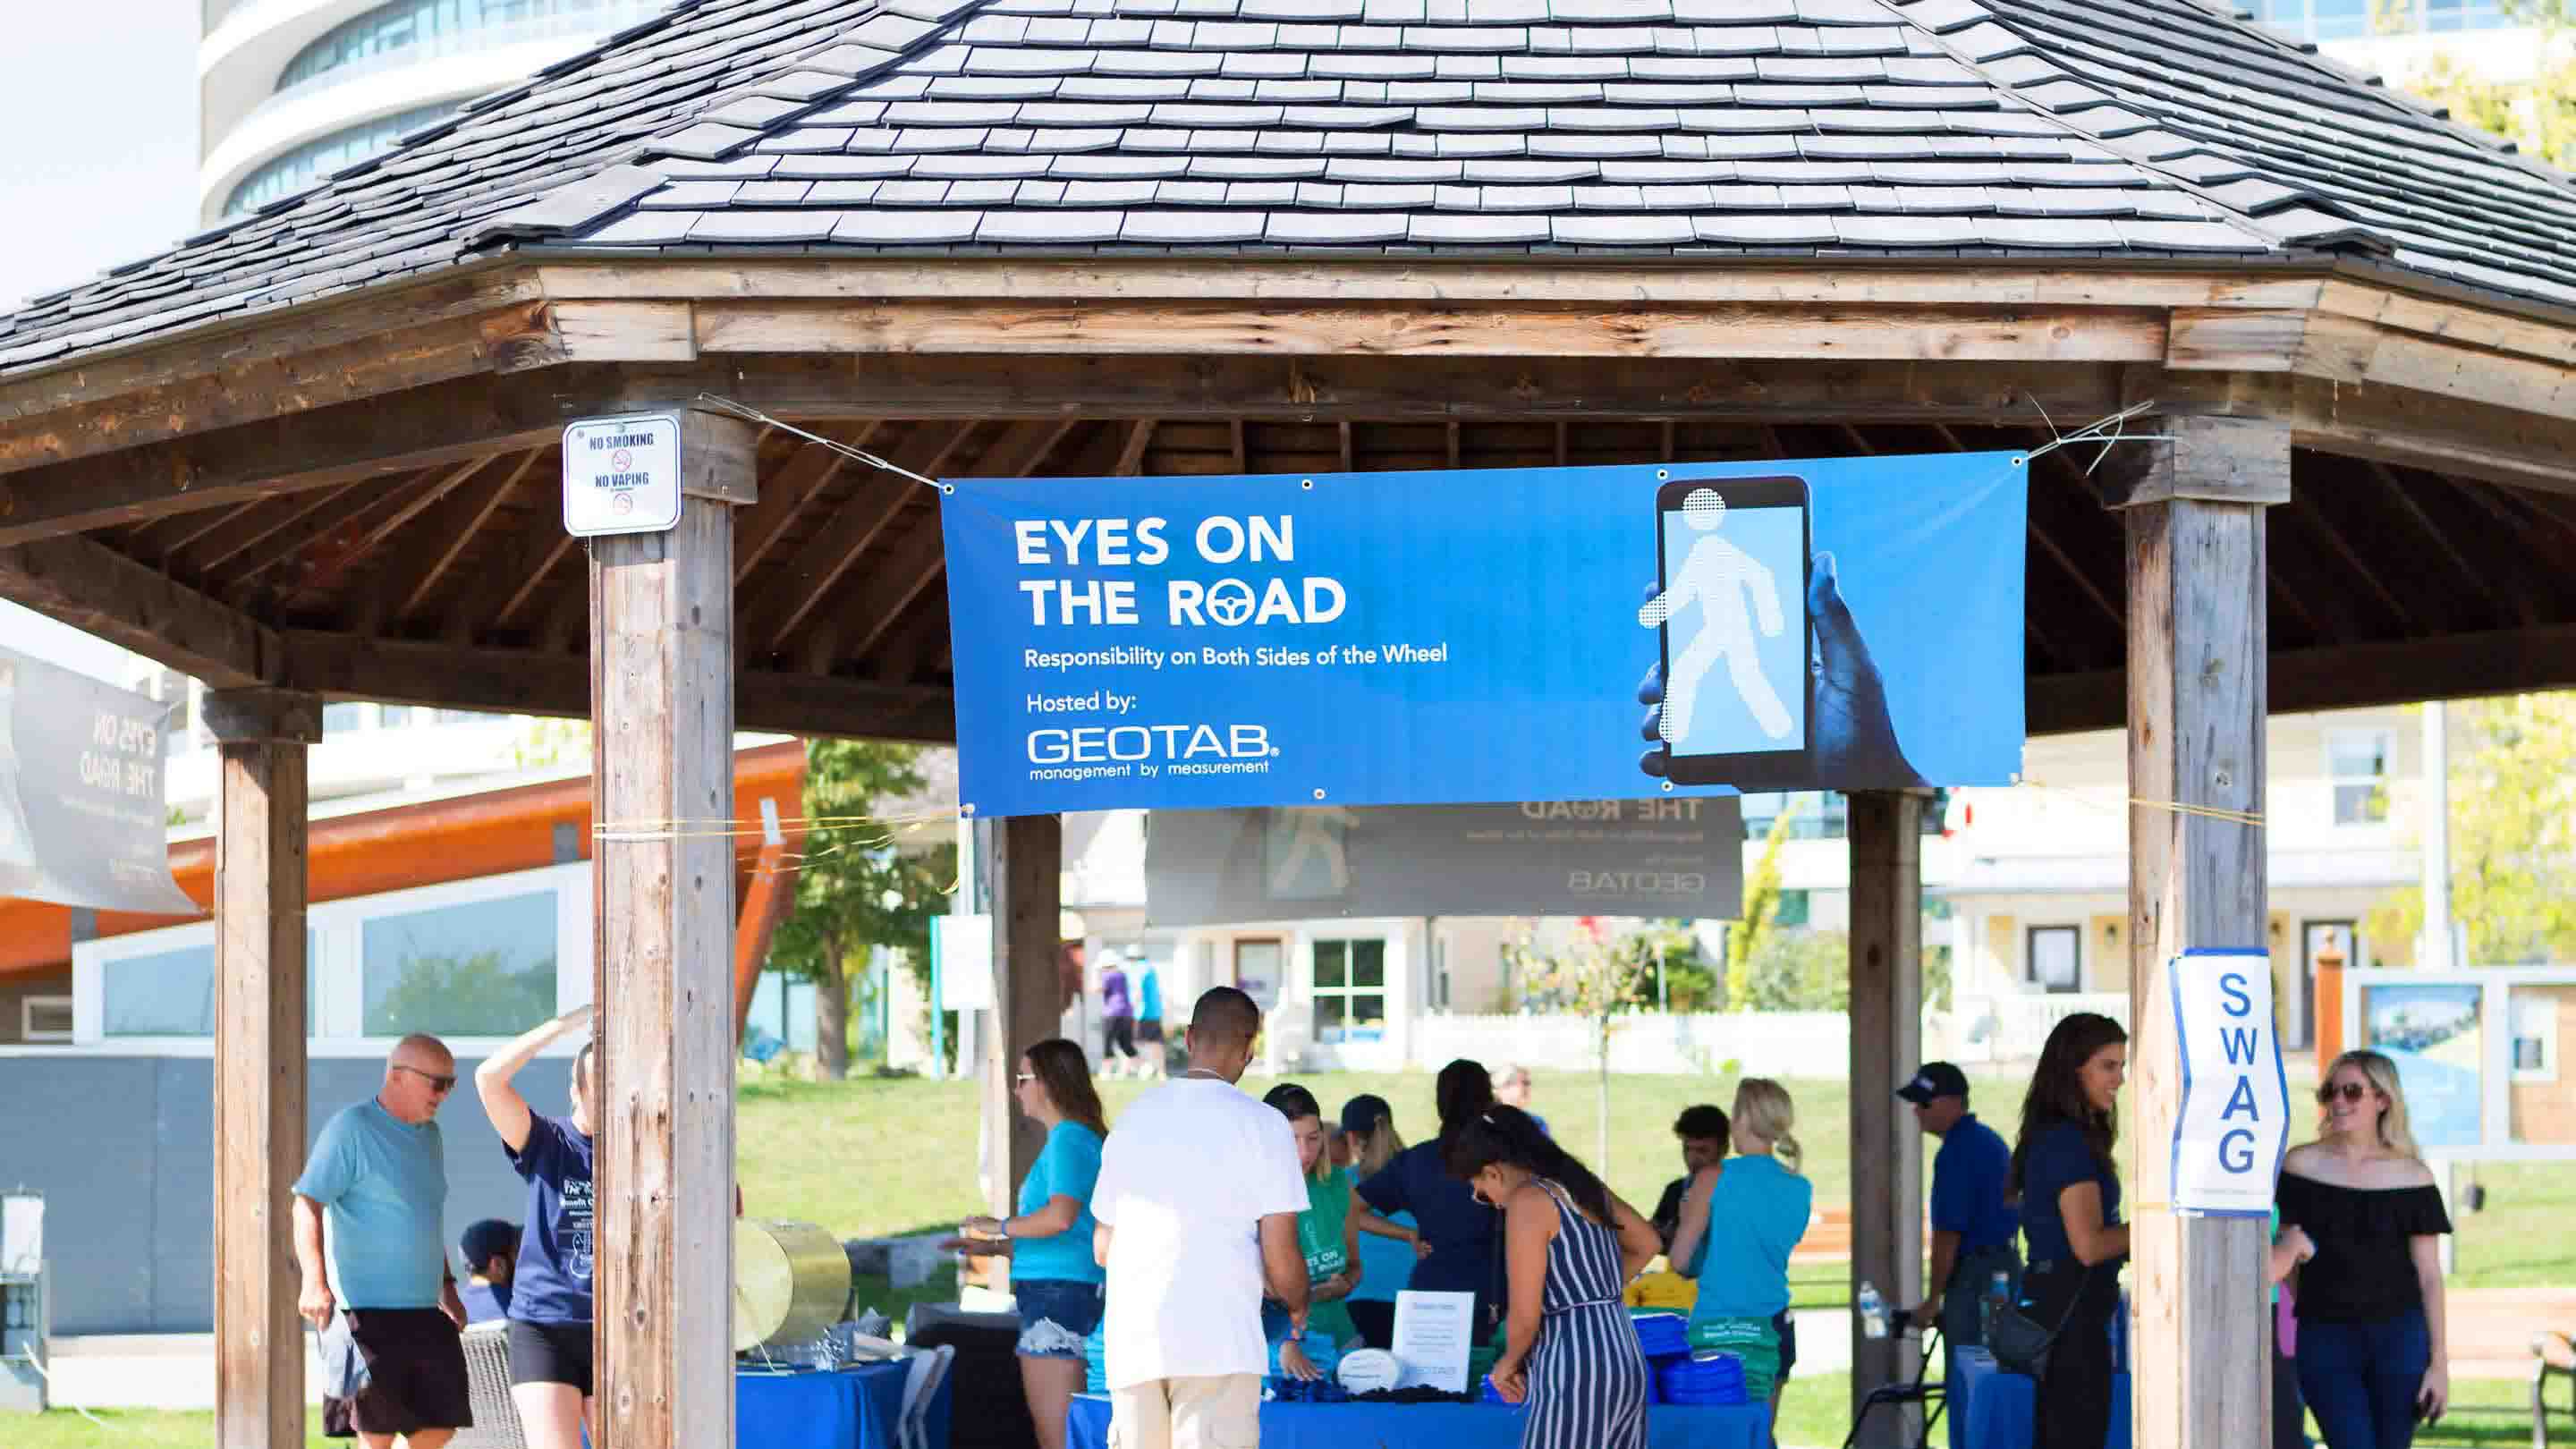 Eyes On The Road event hosted by Geotab outside under a gazebo. 